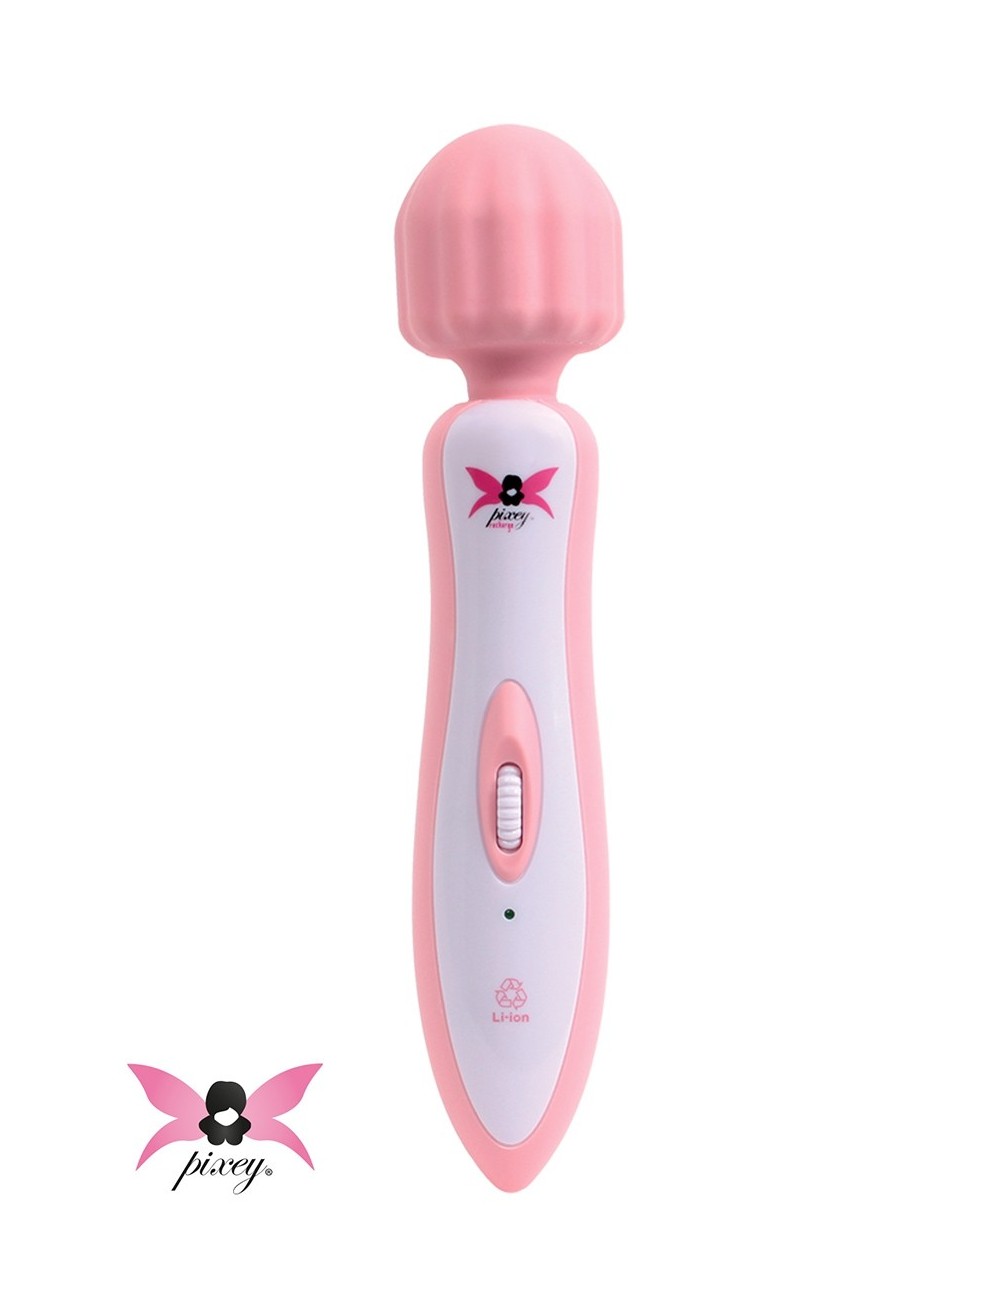 Vibro Wand rechargeable Pixey Exceed